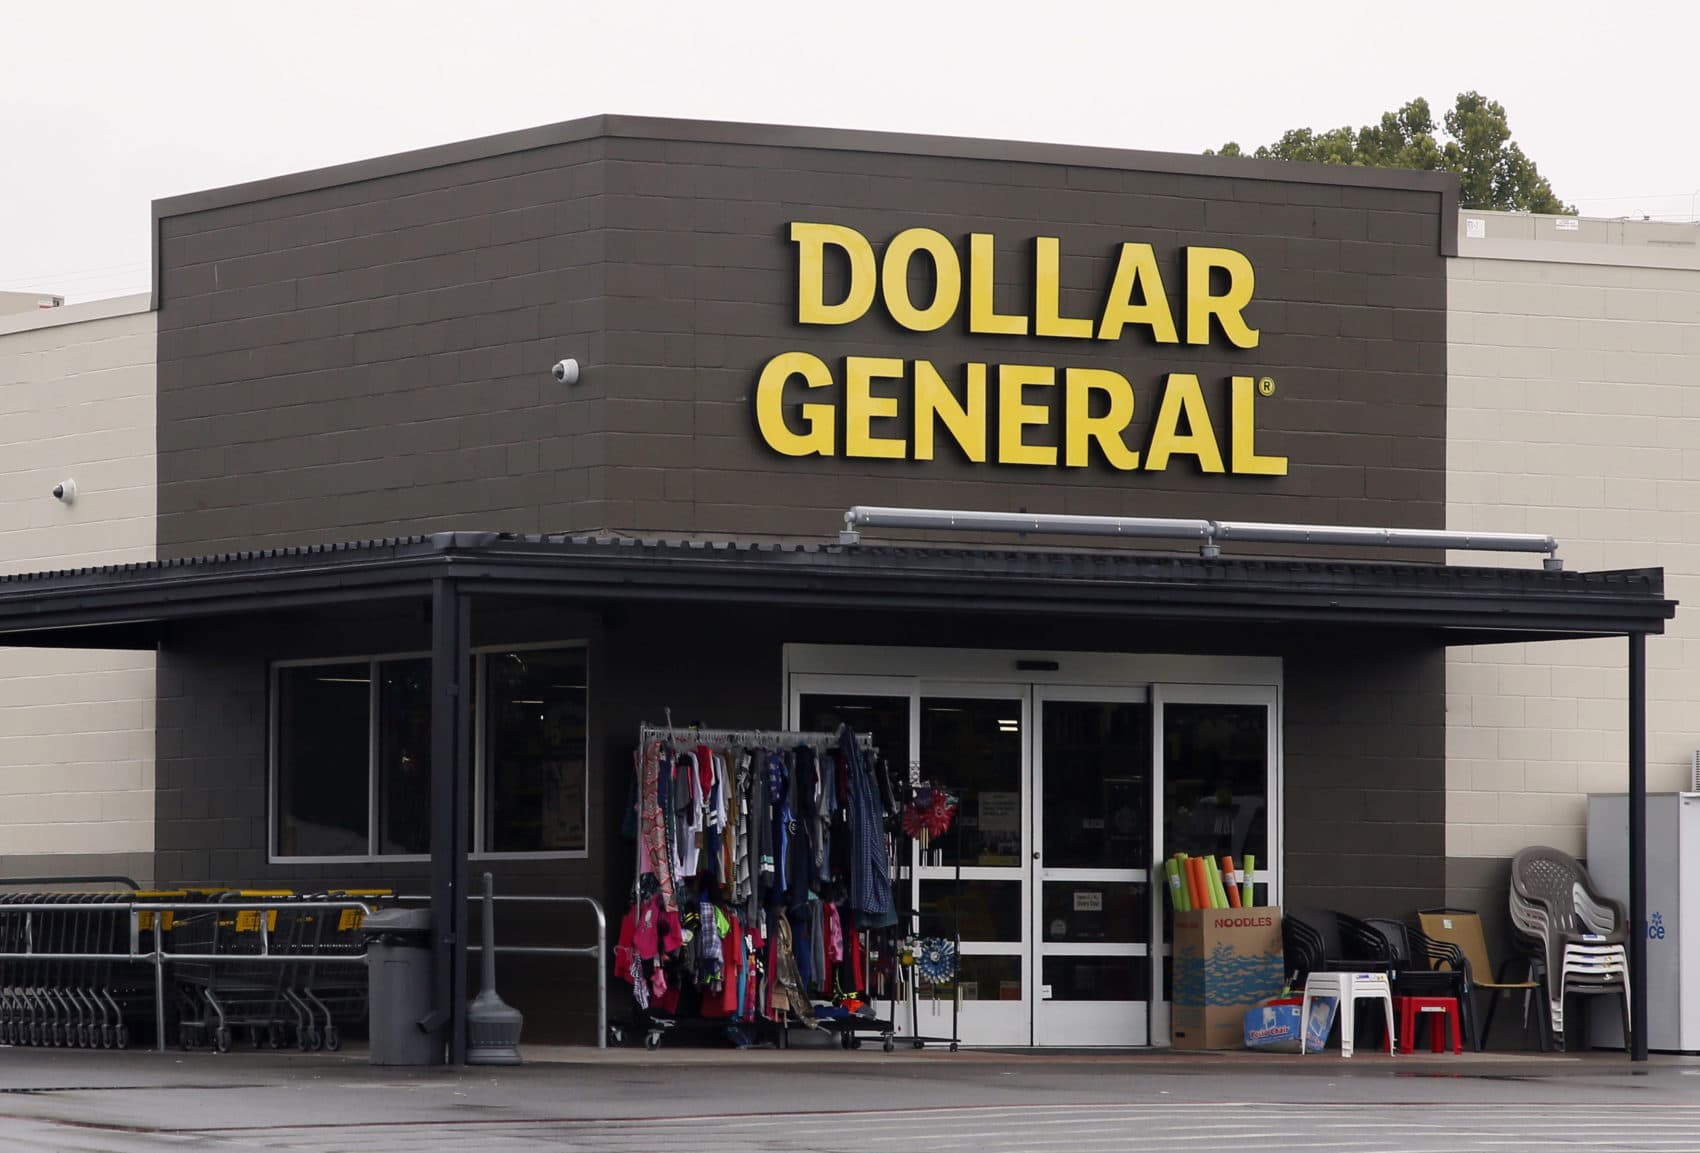 A Dollar General store in Luther, Oklahoma. (Sue Ogrocki/AP)